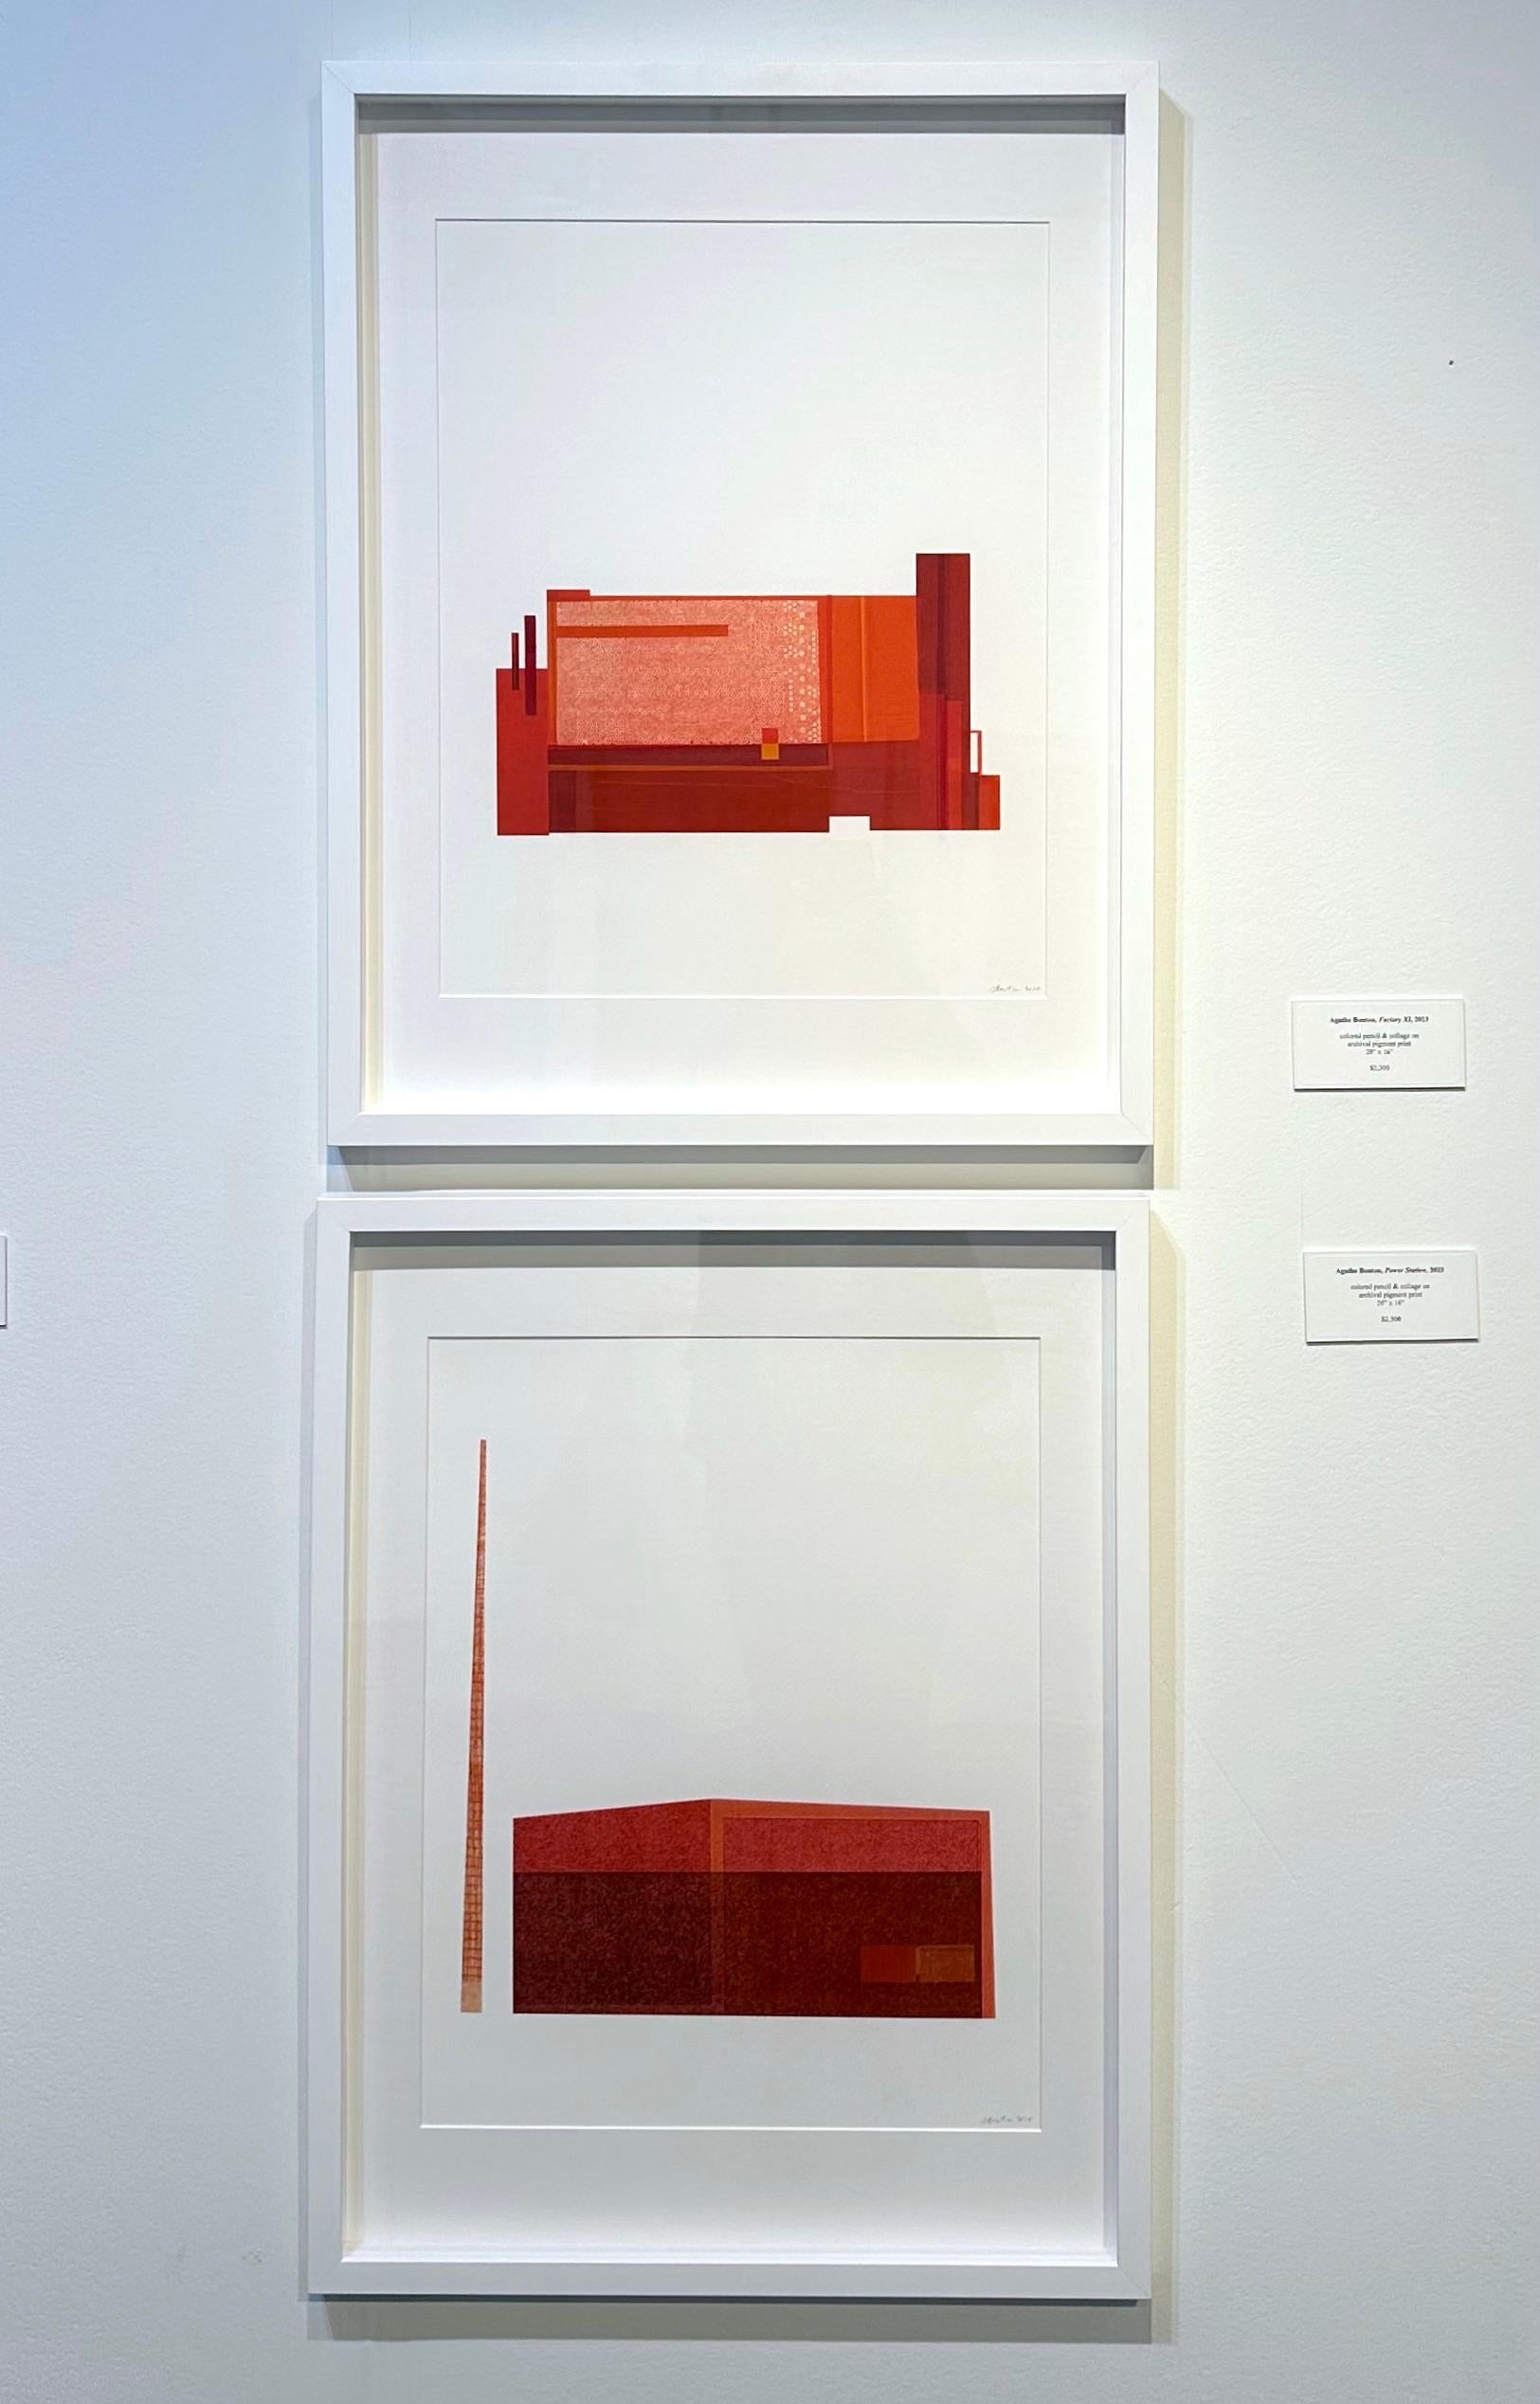 Factory XI: modernist urban architectural collage on monoprint in red, framed - Contemporary Print by Agathe Bouton